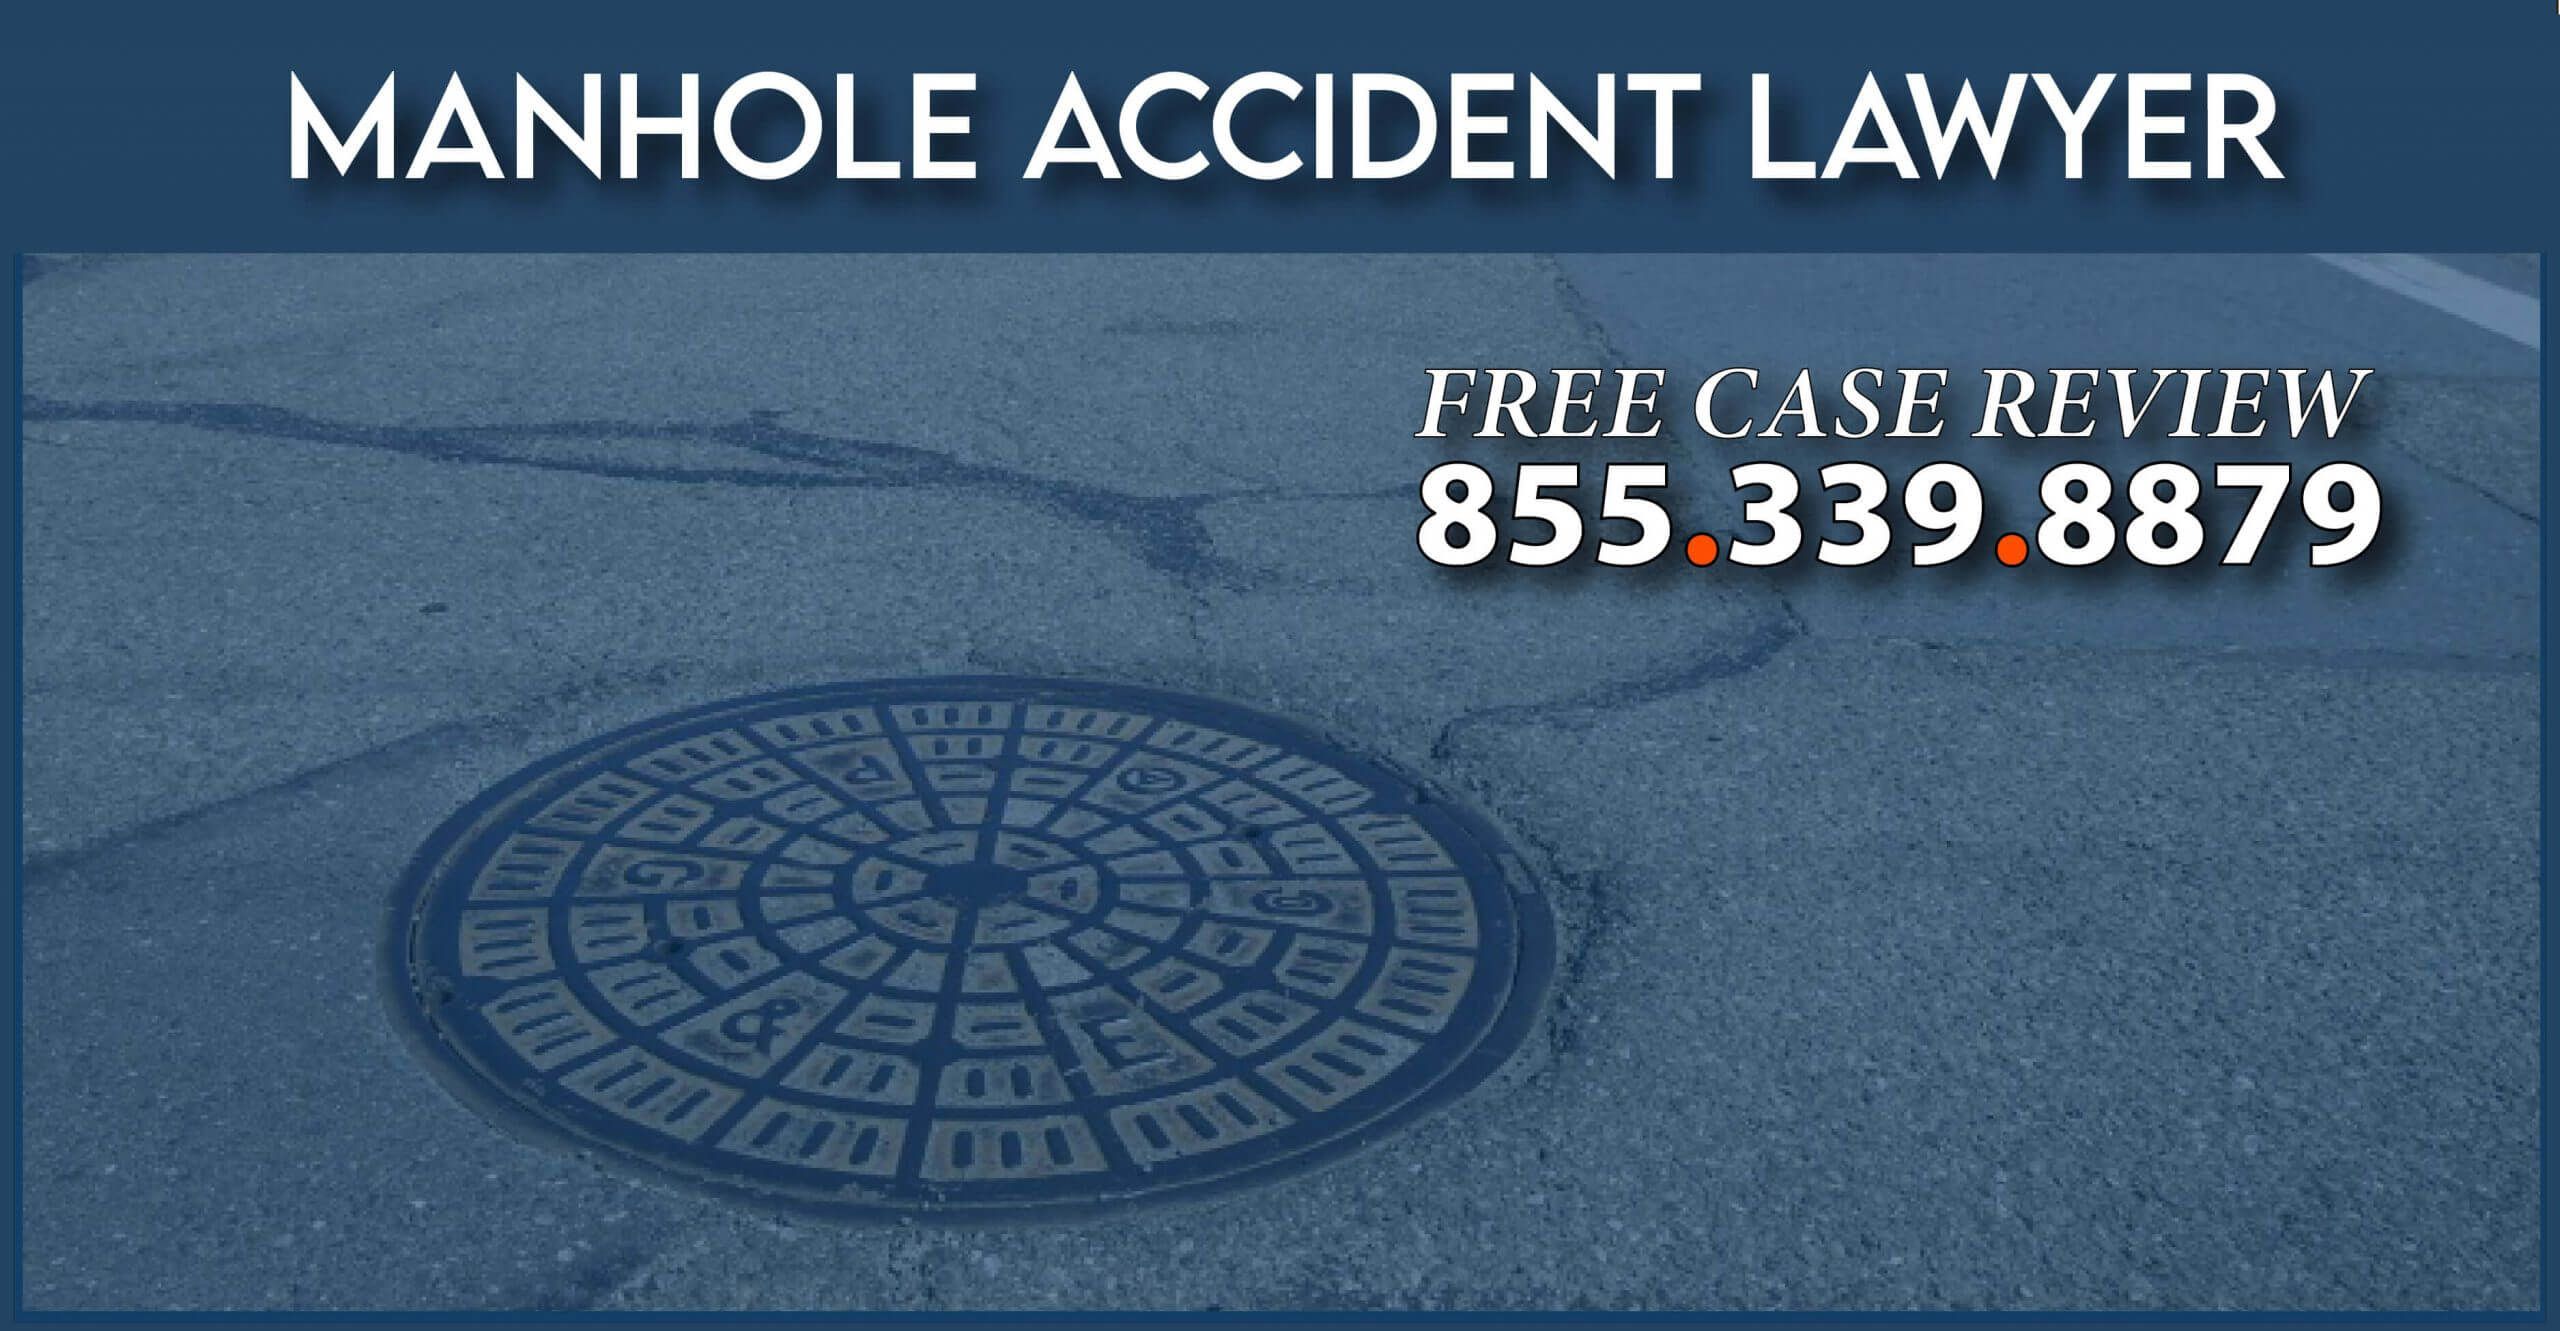 manhole accident lawyer personal injury sue